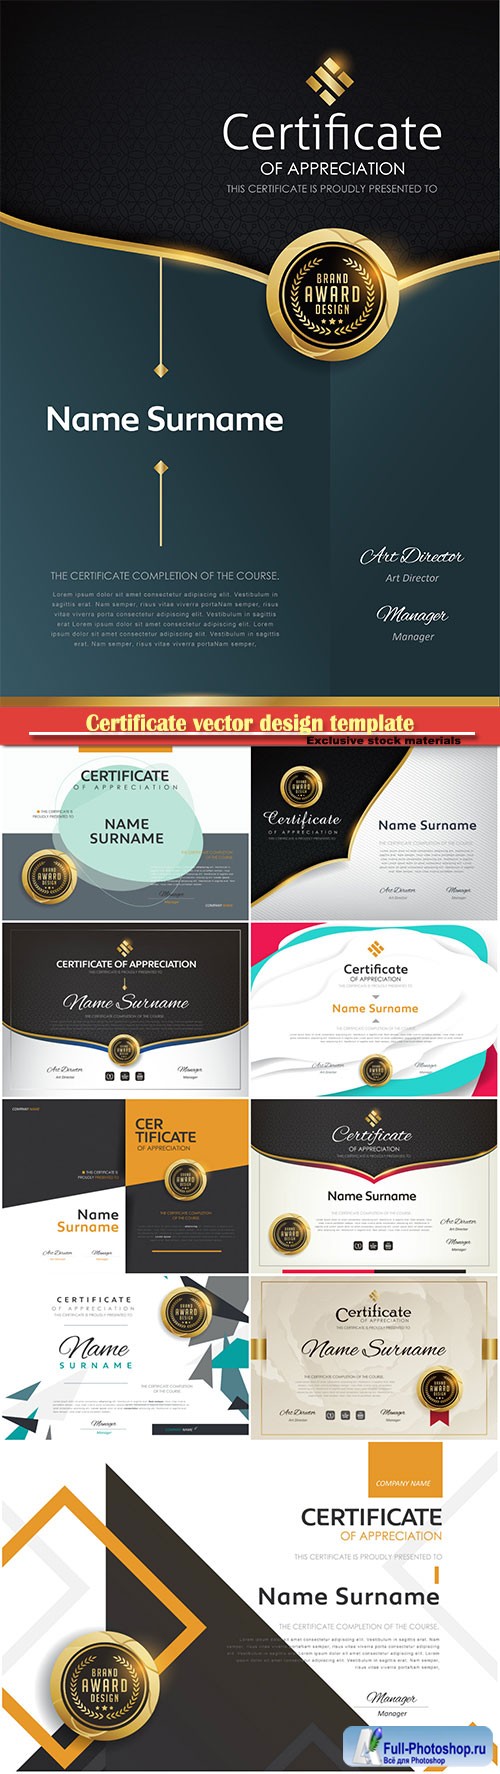 Certificate and vector diploma design template # 56